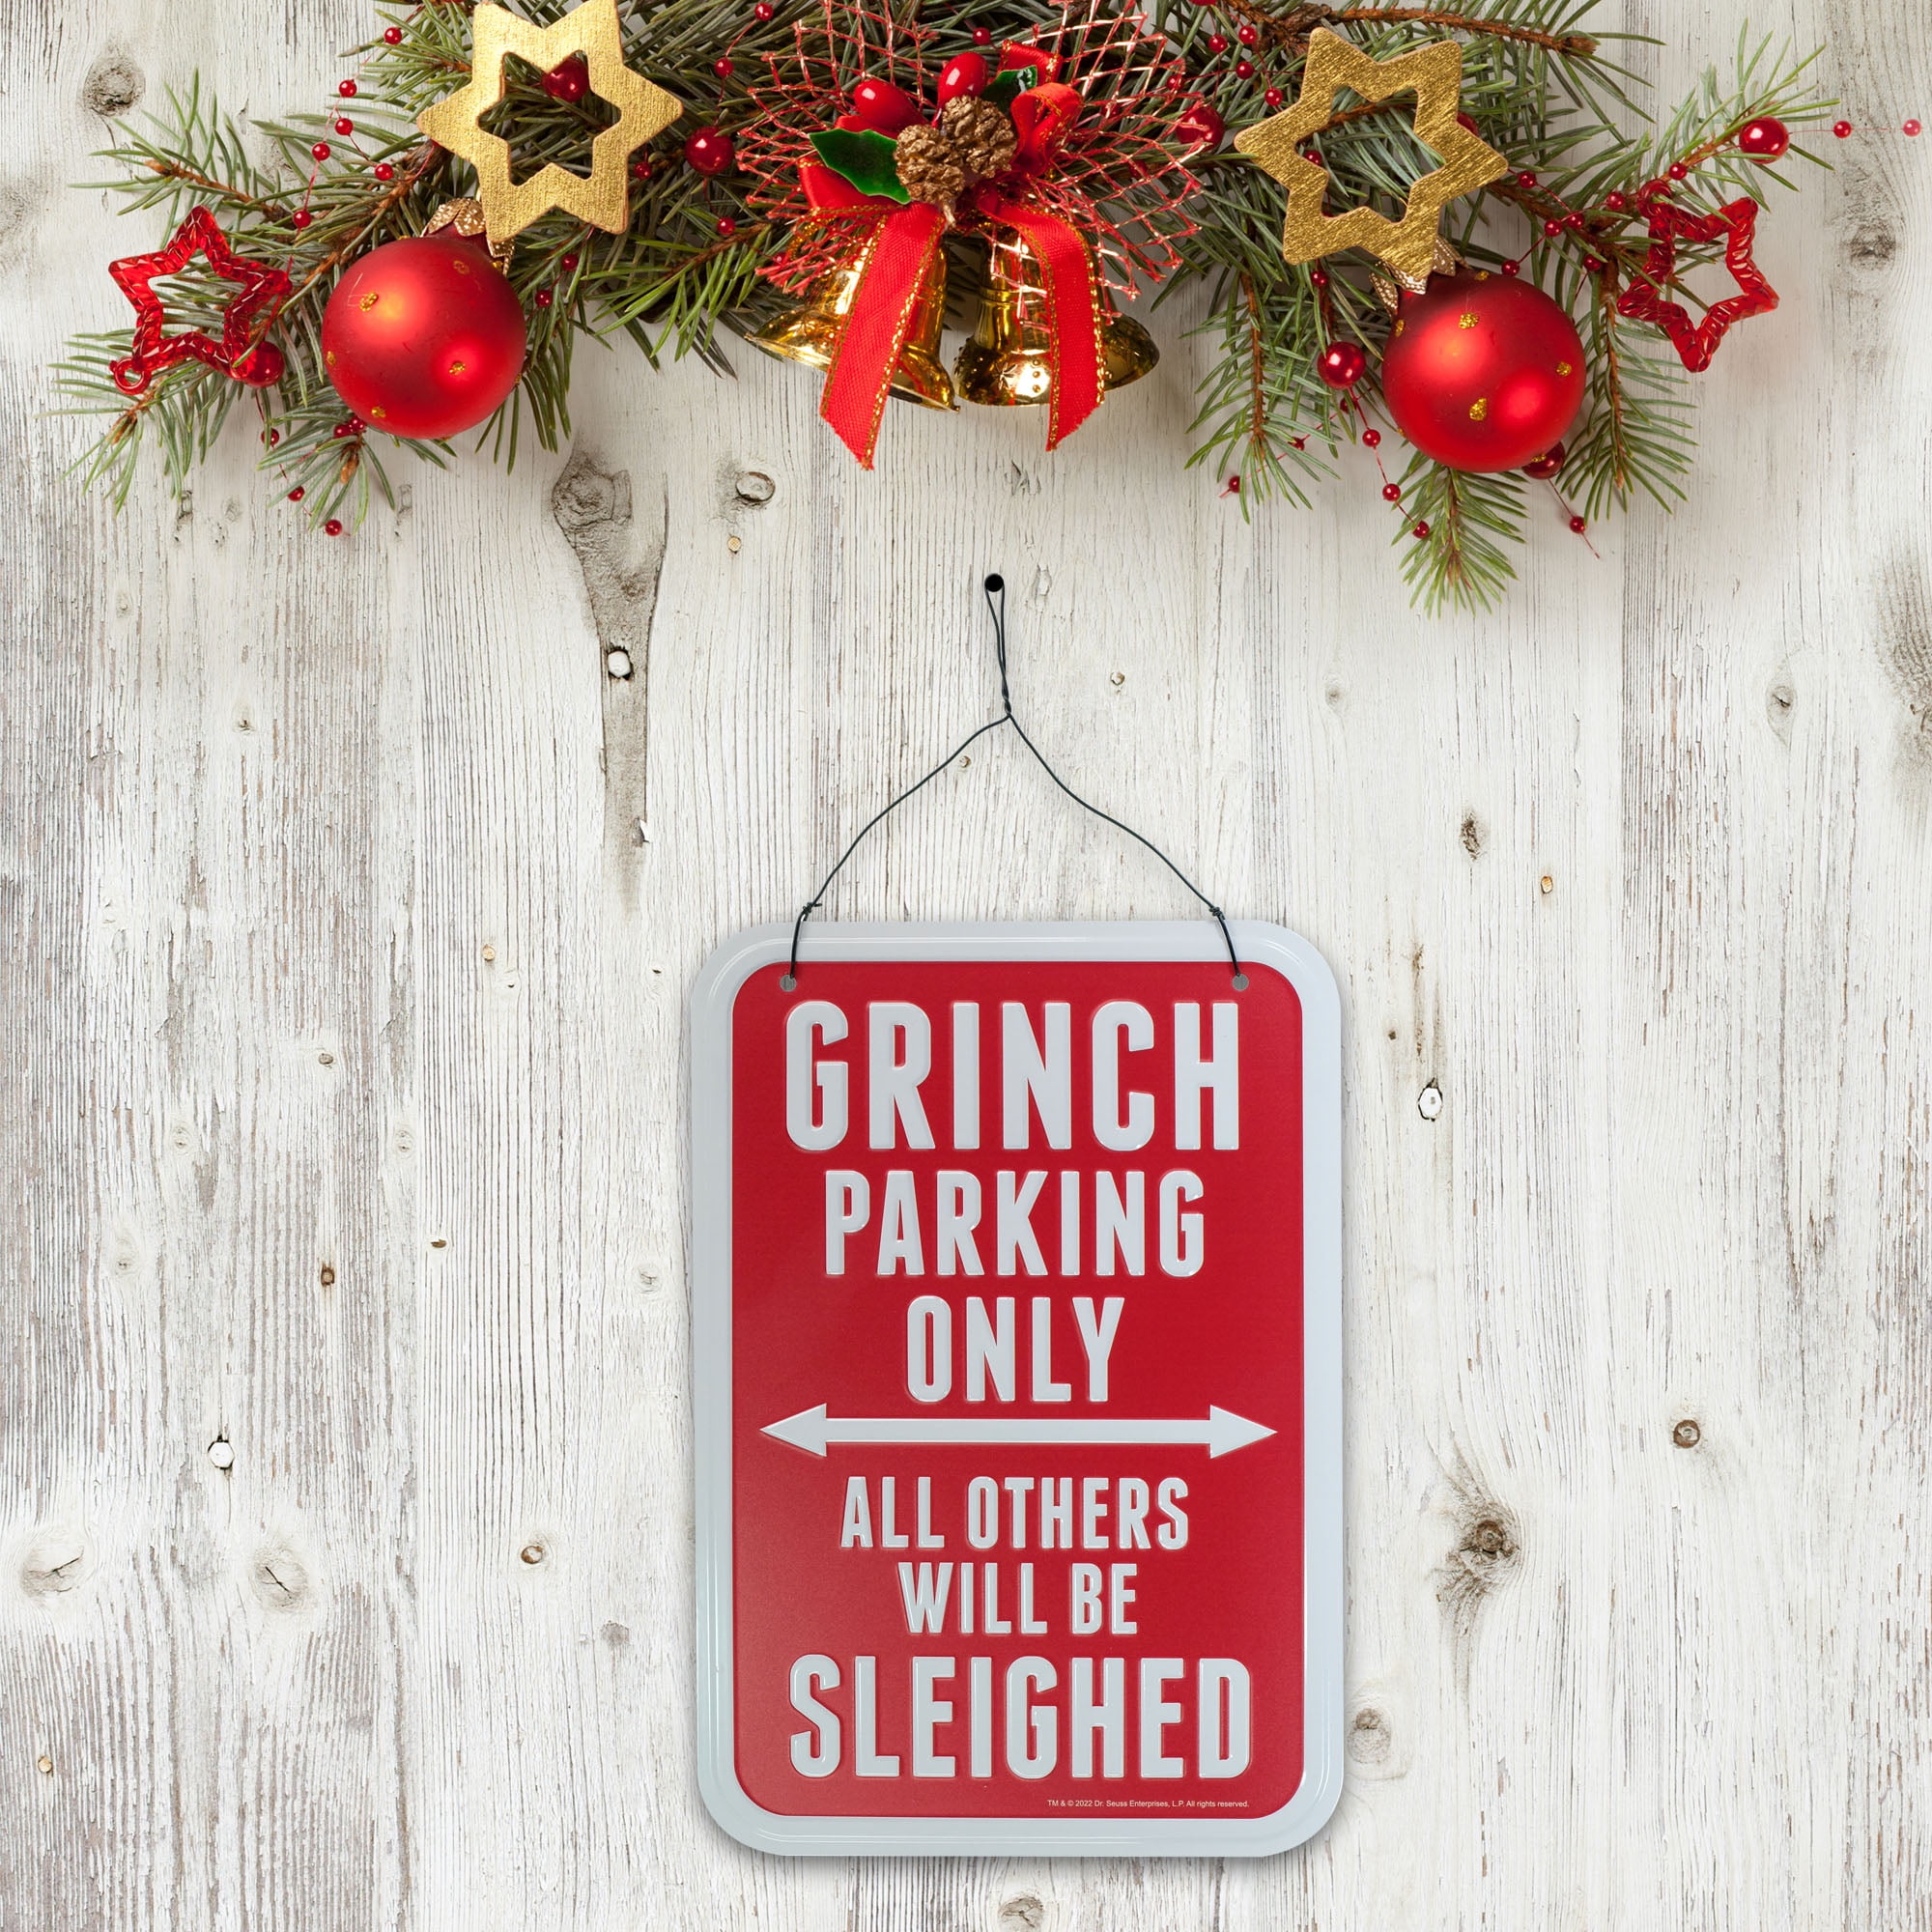 Dr. Seuss' The Grinch Who Stole Christmas Dr Seuss' The Grinch Who Stole Christmas, "Grinch Parking Only" Rectangular Hanging Sign 8 inches Tall, Metal, Red